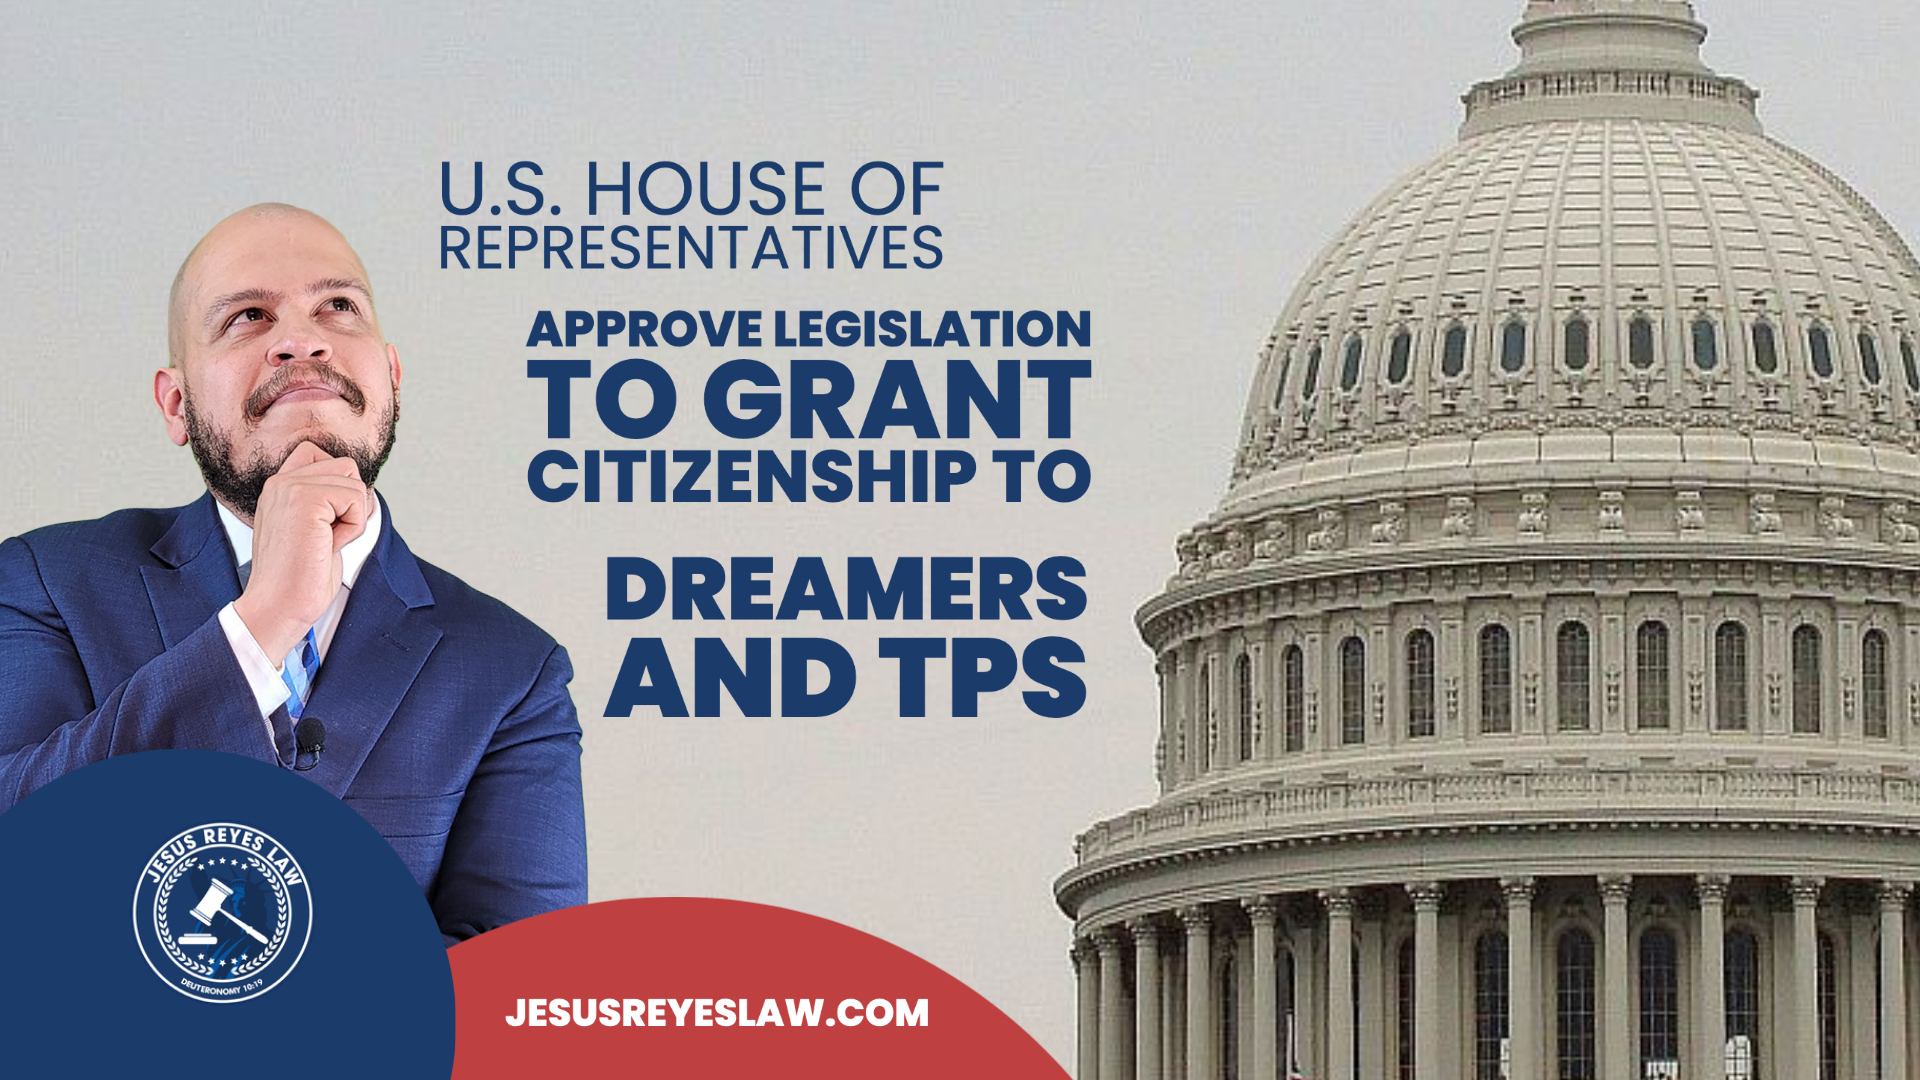 U.S. House of Representatives approve legislation to grant citizenship to Dreamers and TPS